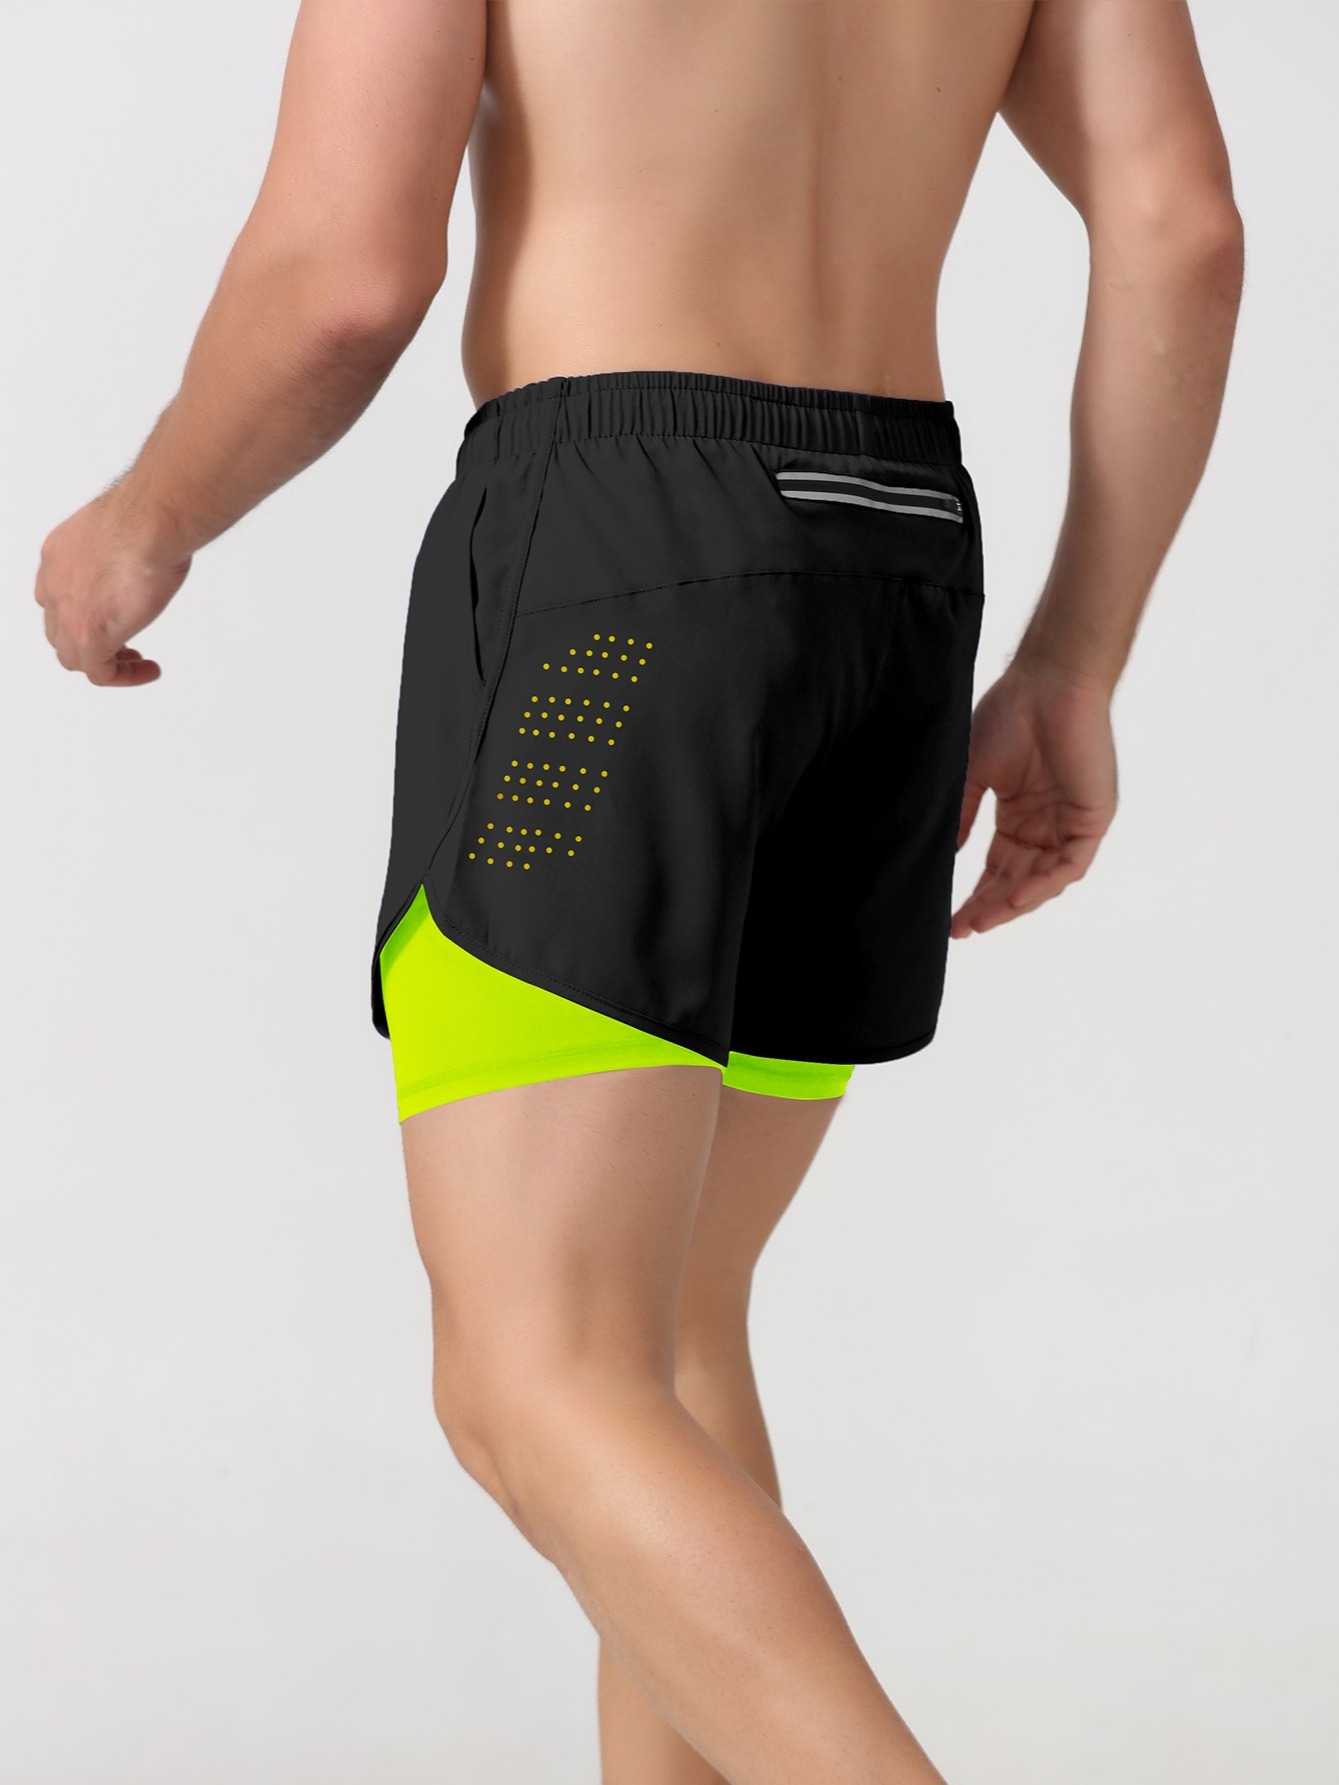 Yellow Athletic Shorts for Men